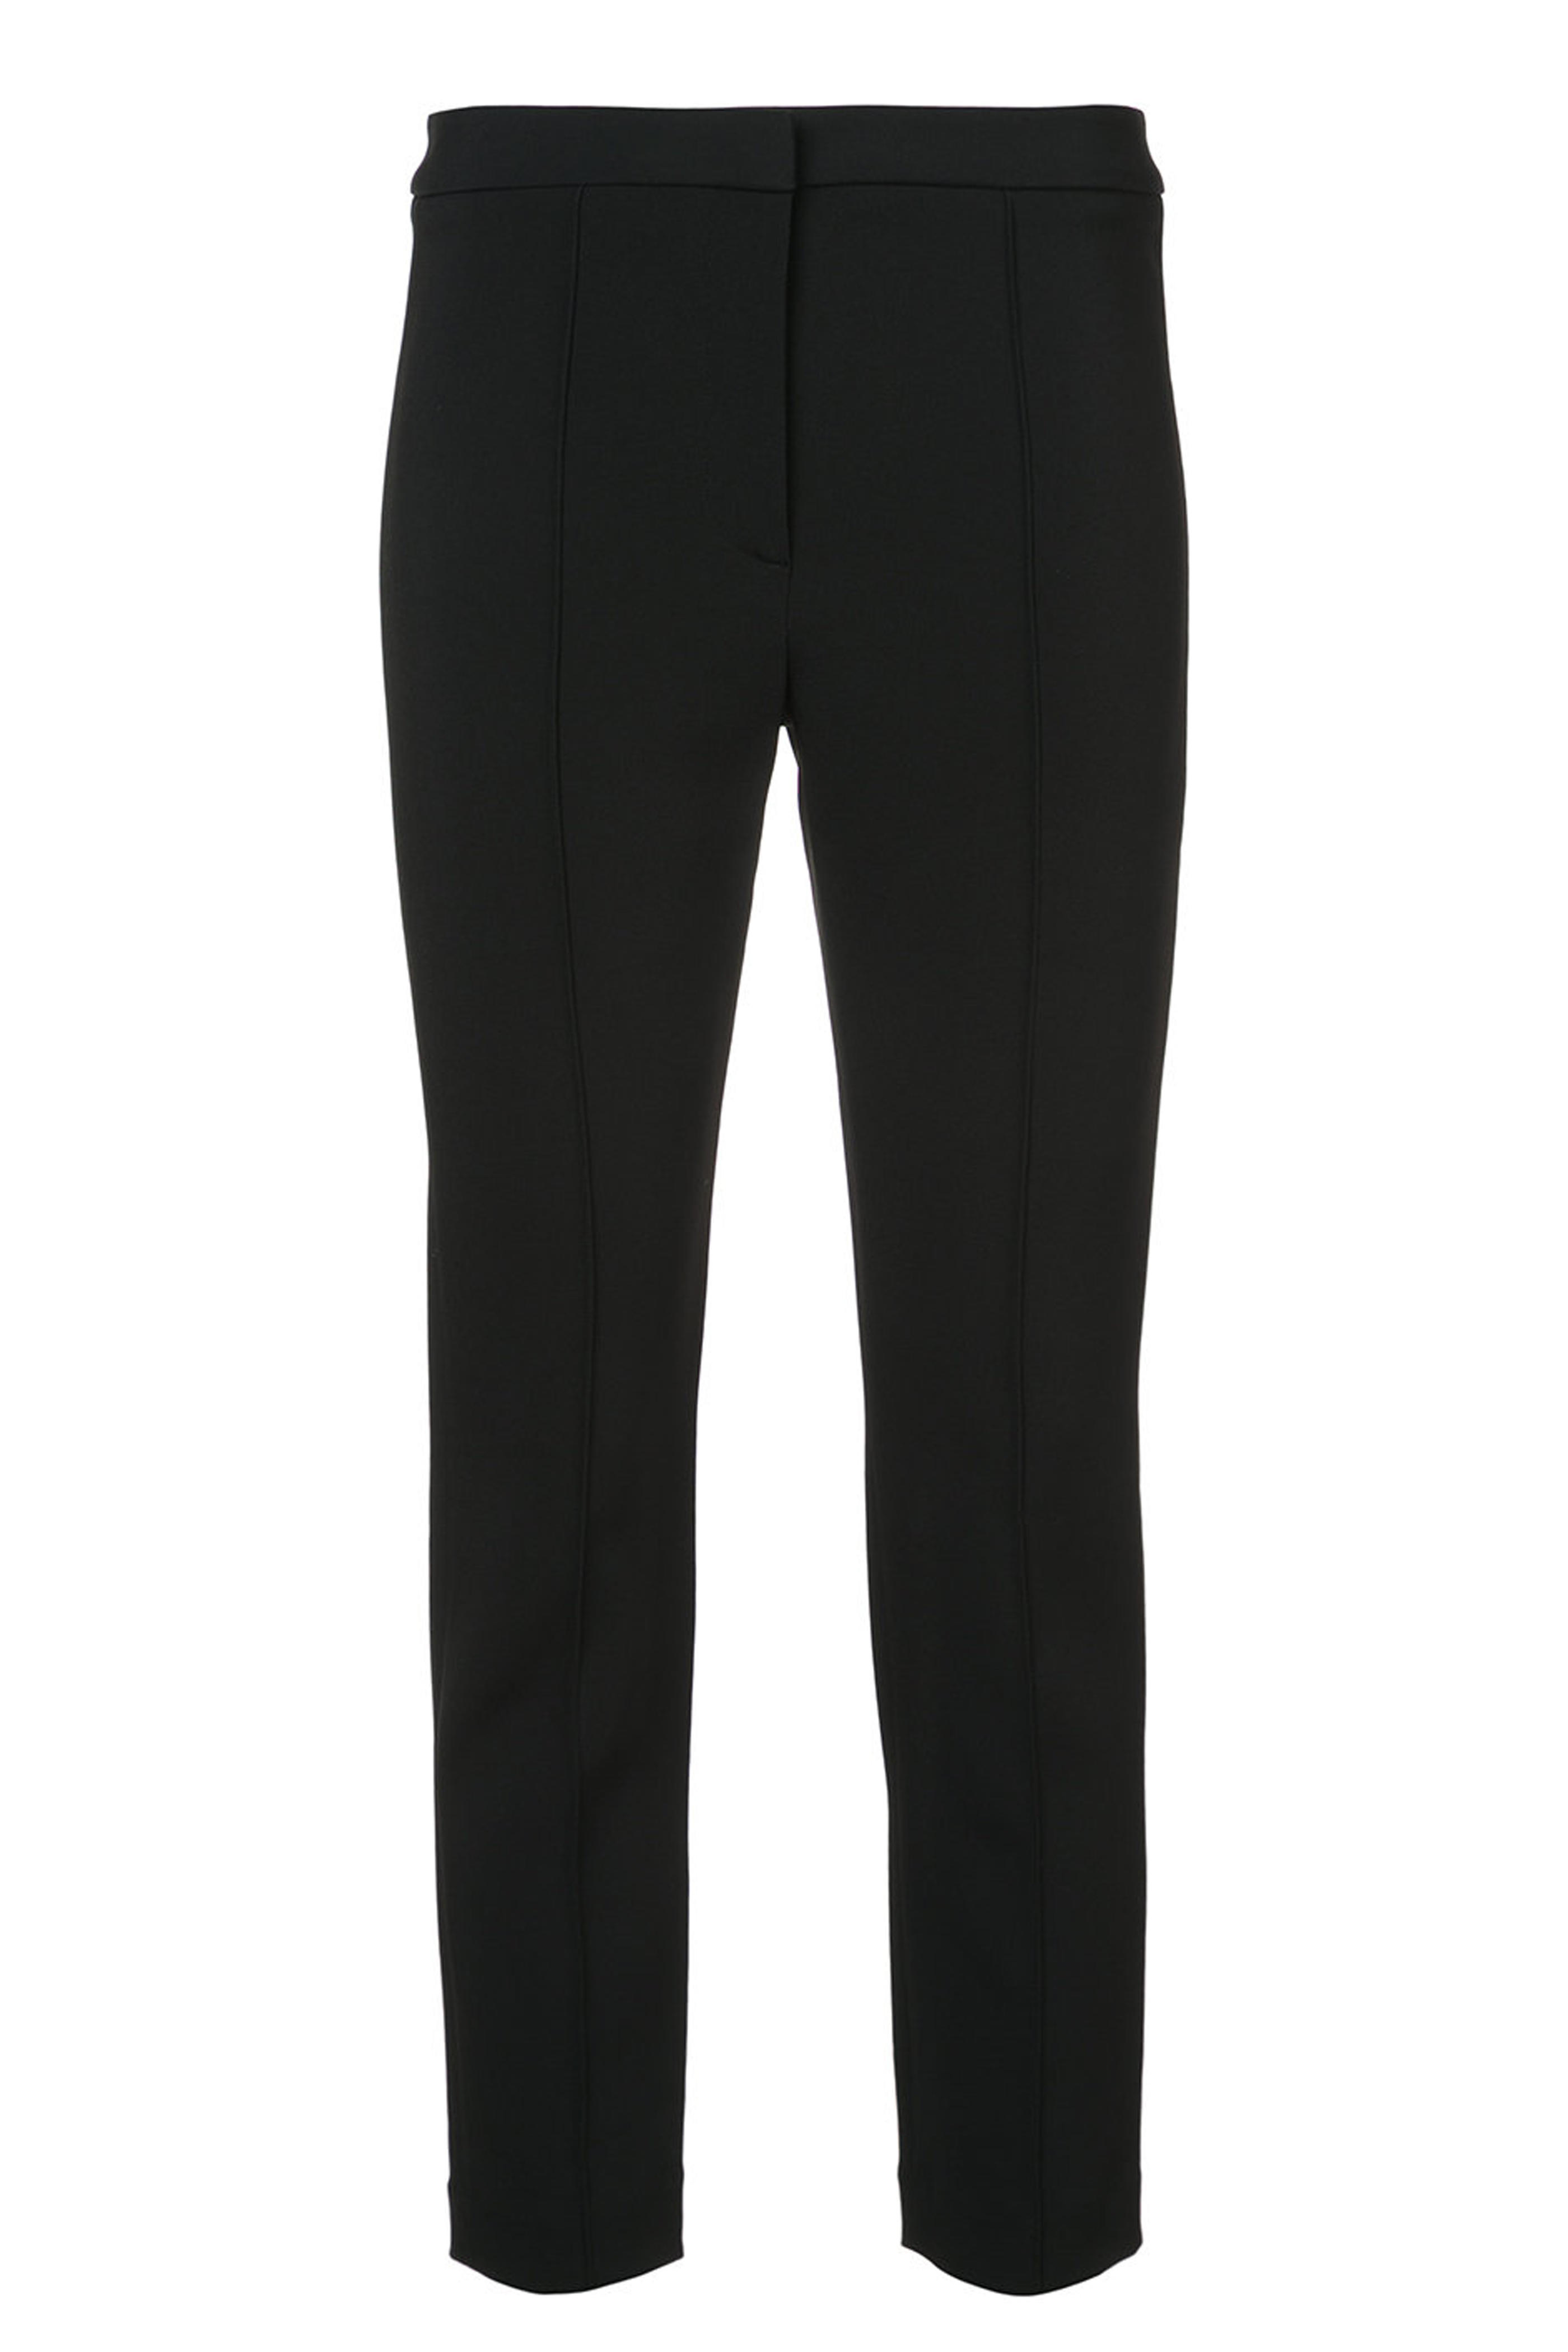 Adam Lippes - Black Pintuck Cigarette Pant | Mitchell Stores